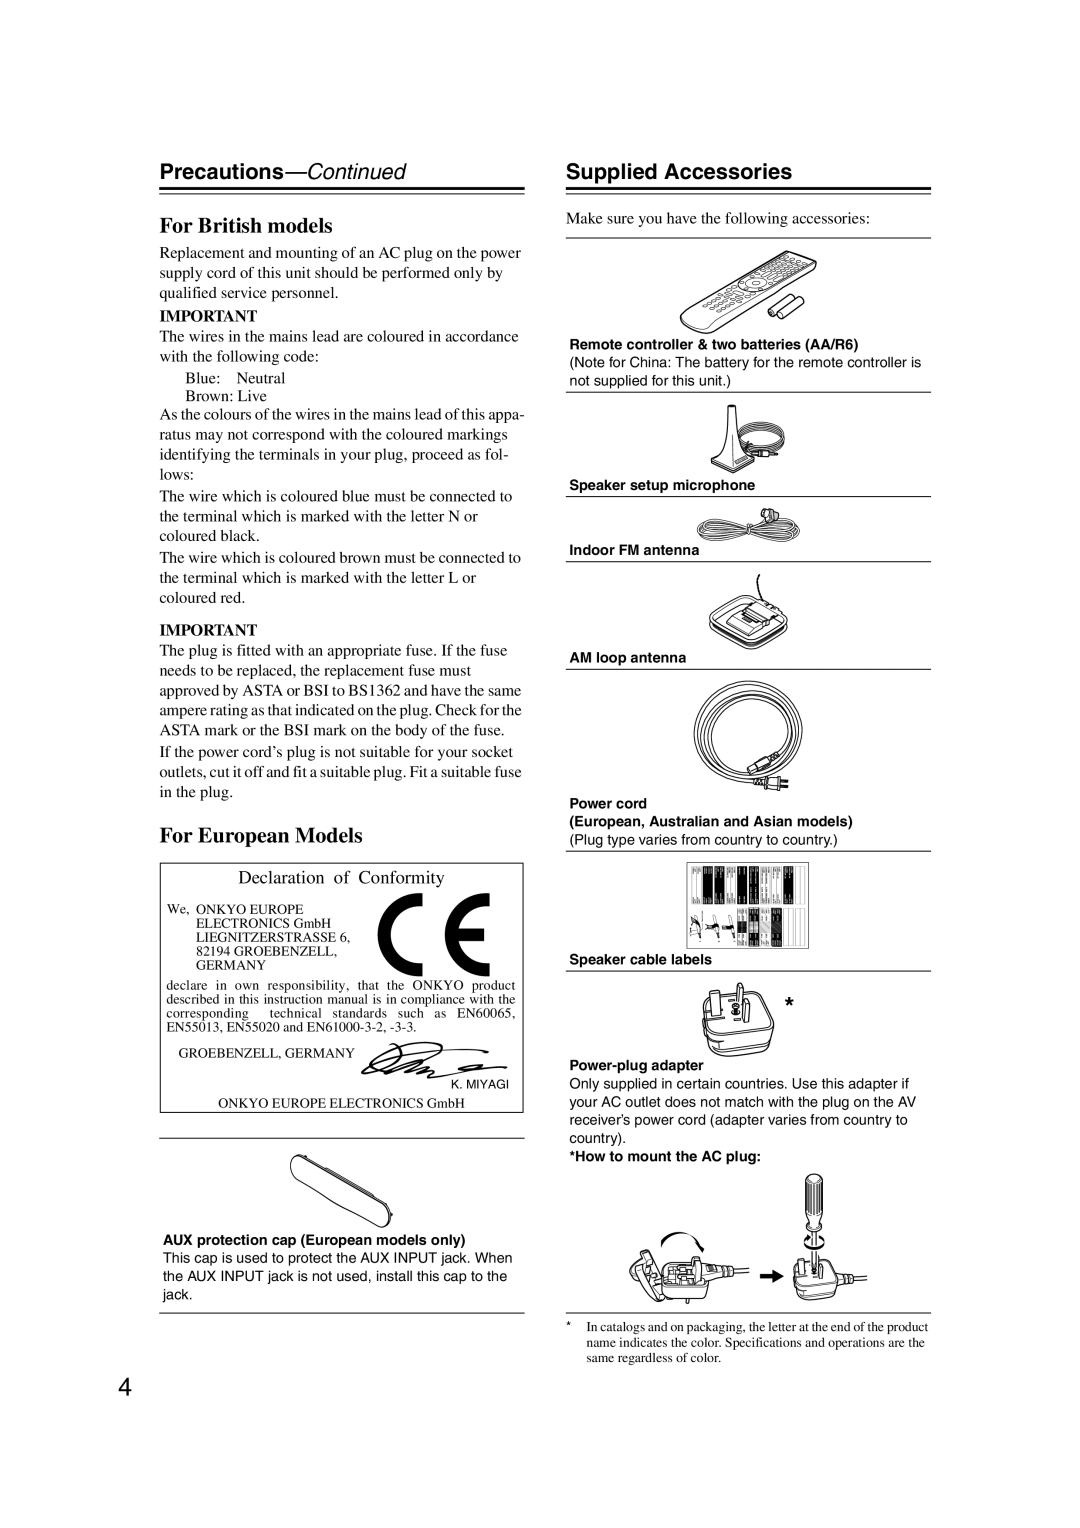 Onkyo TX-SR707 instruction manual Precautions—Continued, For British models, For European Models, Supplied Accessories 